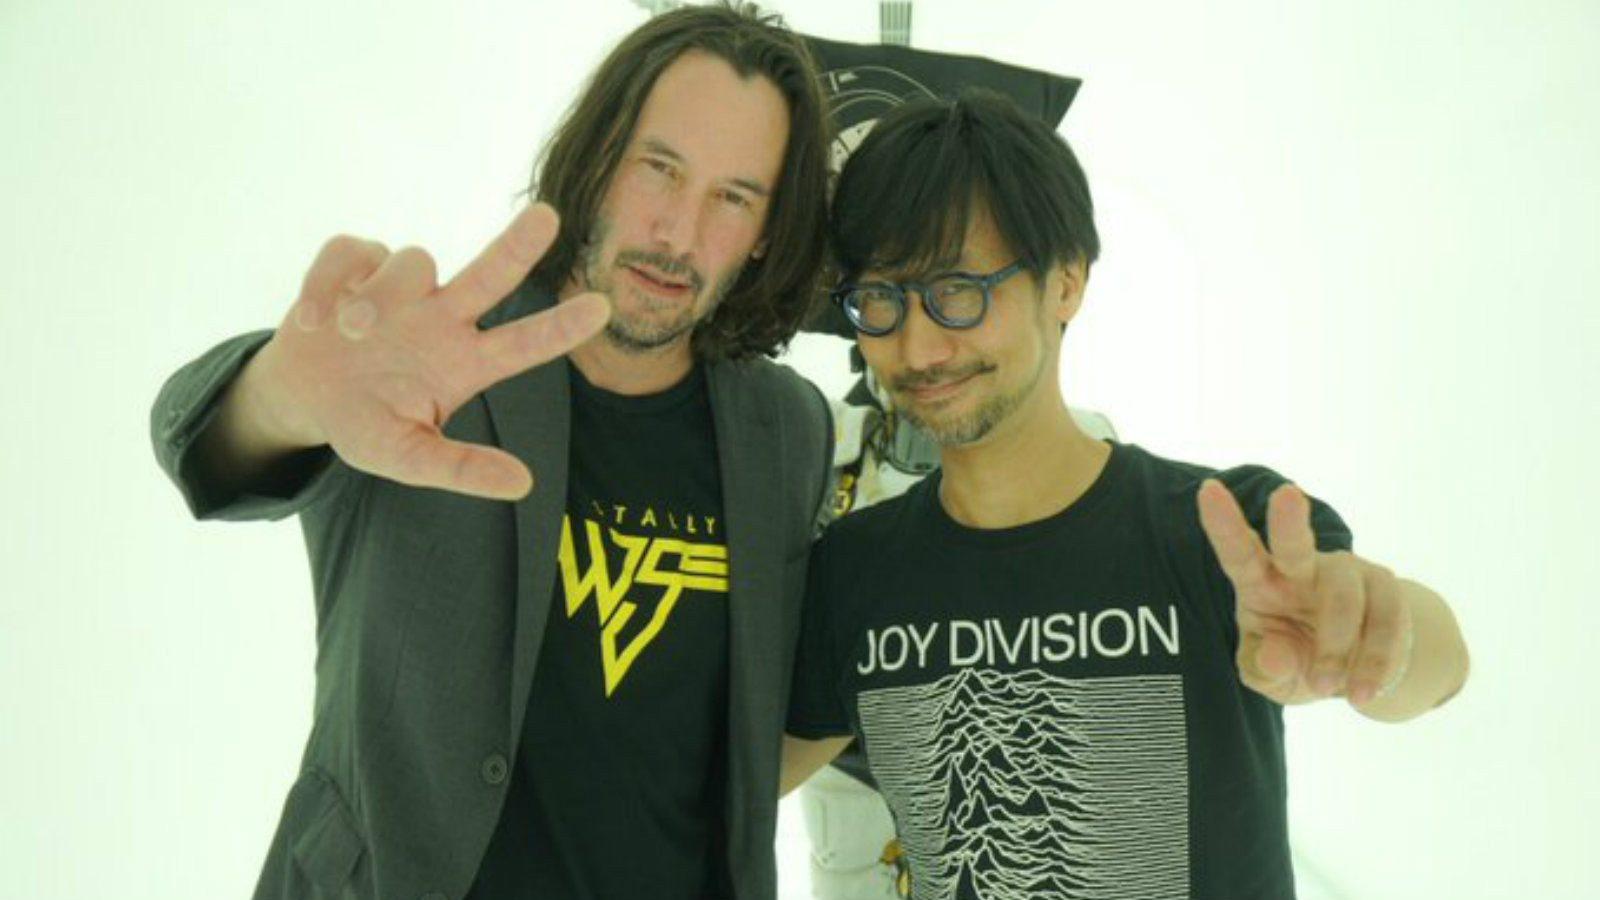 Kojima seems to be speaking very highly of Keanu Reeves. Perhaps they'll  work on a project together? do things with him : r/DeathStranding